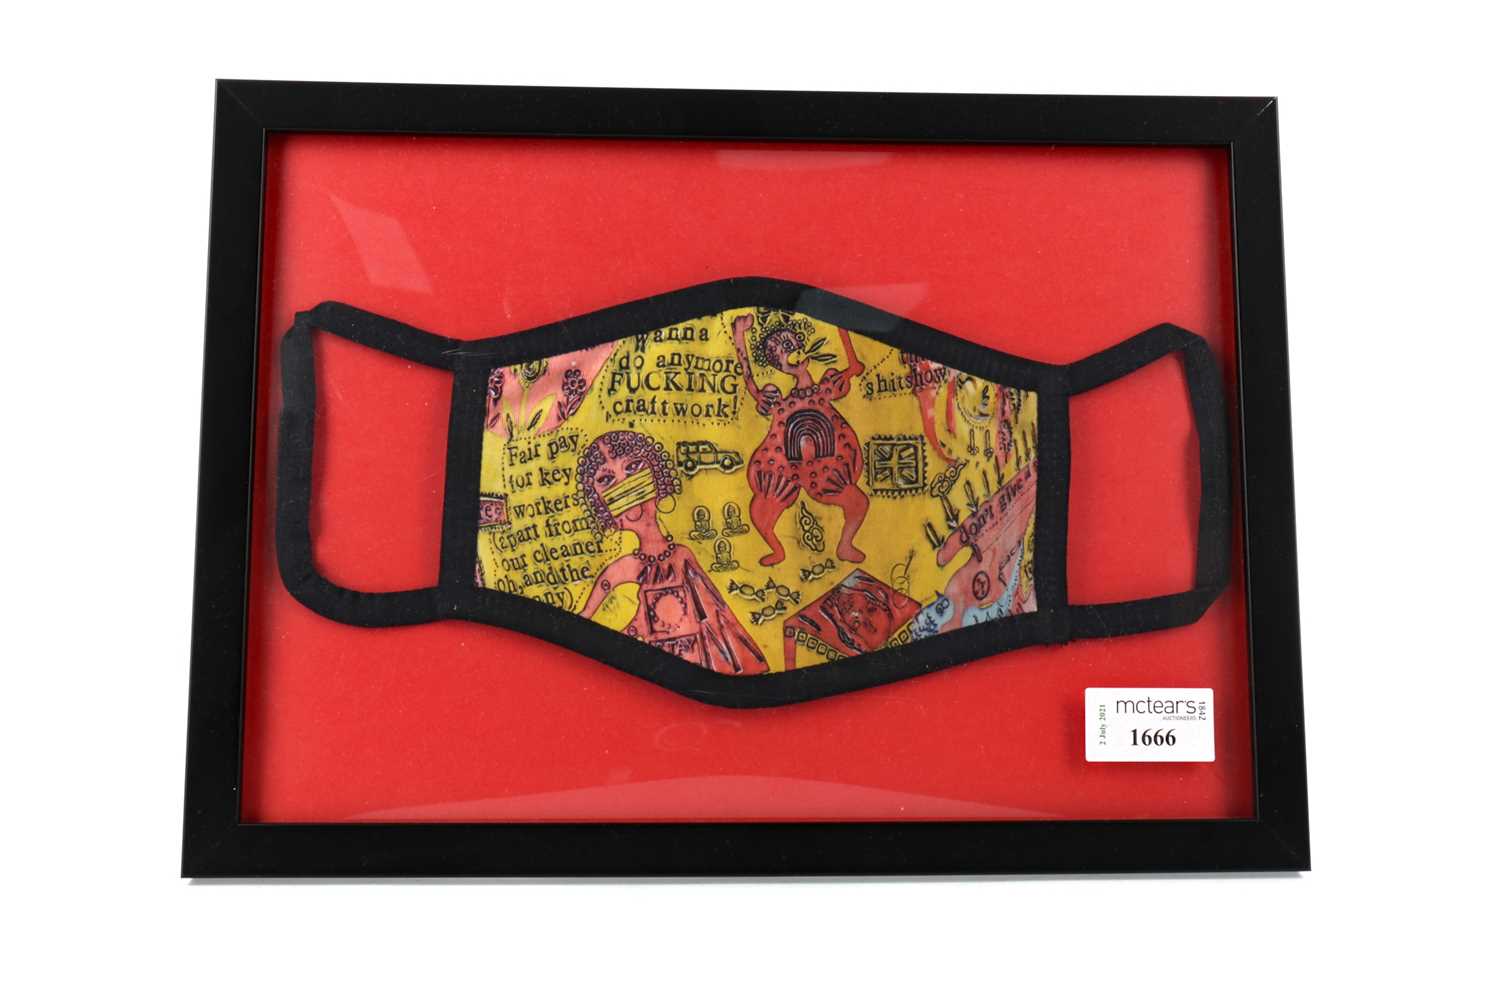 Lot 1666 - "WE SHALL CATCH IT ON THE BEACHES" FACE COVERING, BY GRAYSON PERRY